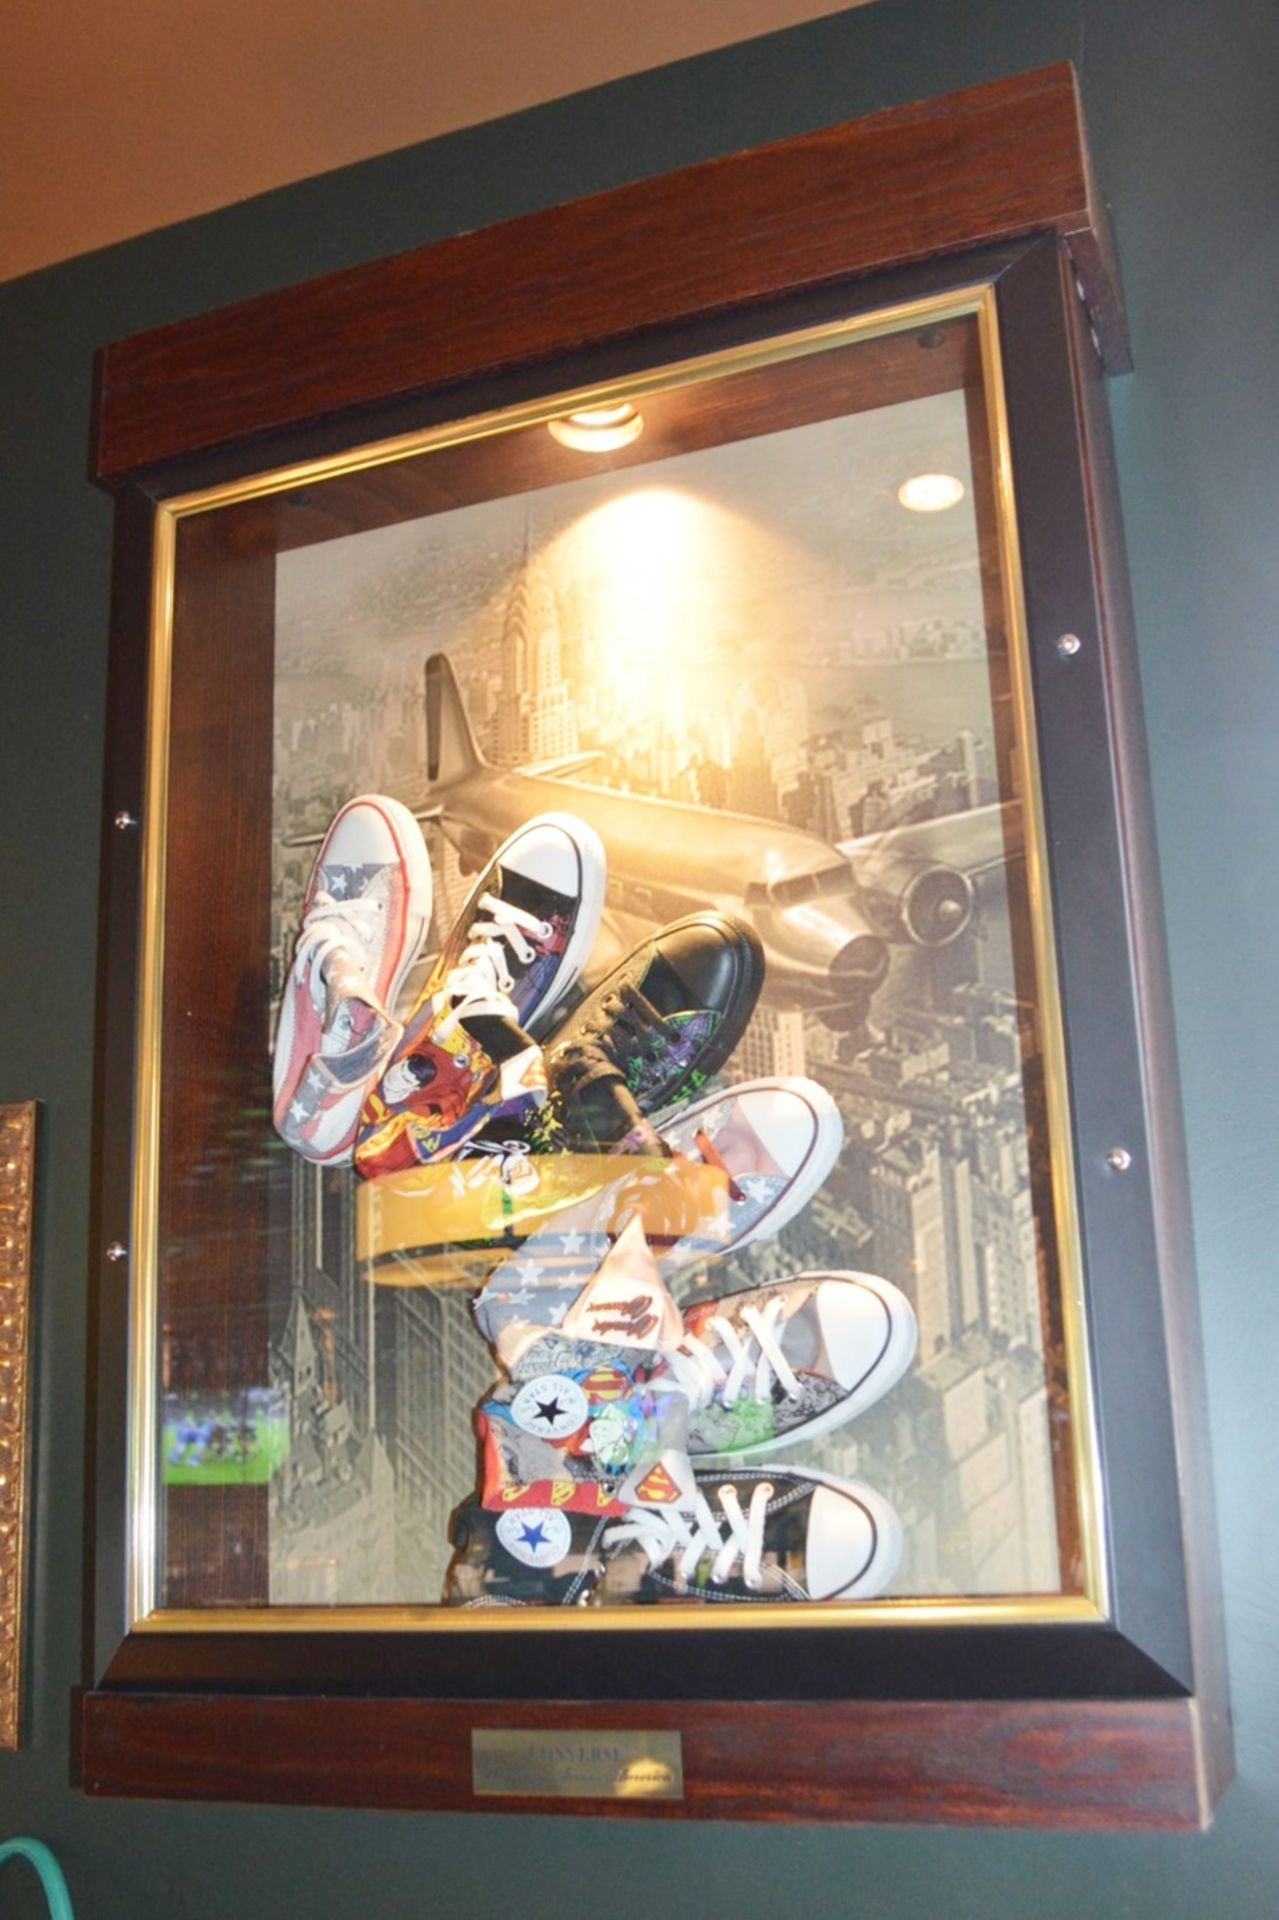 1 x Americana Wall Mounted Illuminated Display Case - NOVELTY CONVERSE SHOES - Includes Various - Image 5 of 6